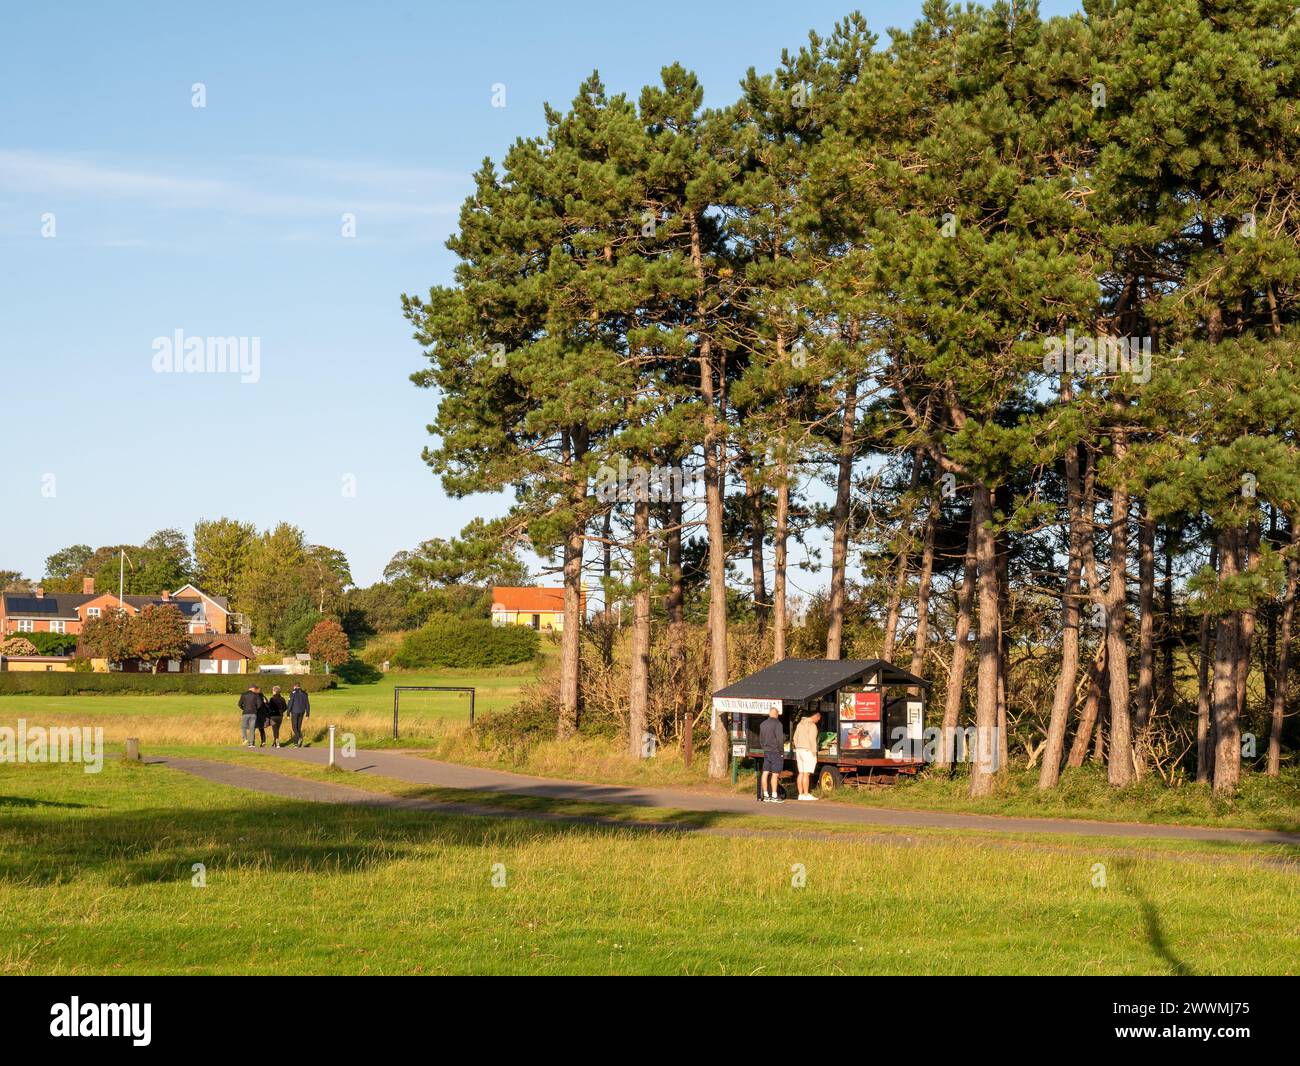 People at a stand with fresh vegetables and potatoes, roadside self-service sale on Tunø island, Midtjylland, Denmark Stock Photo